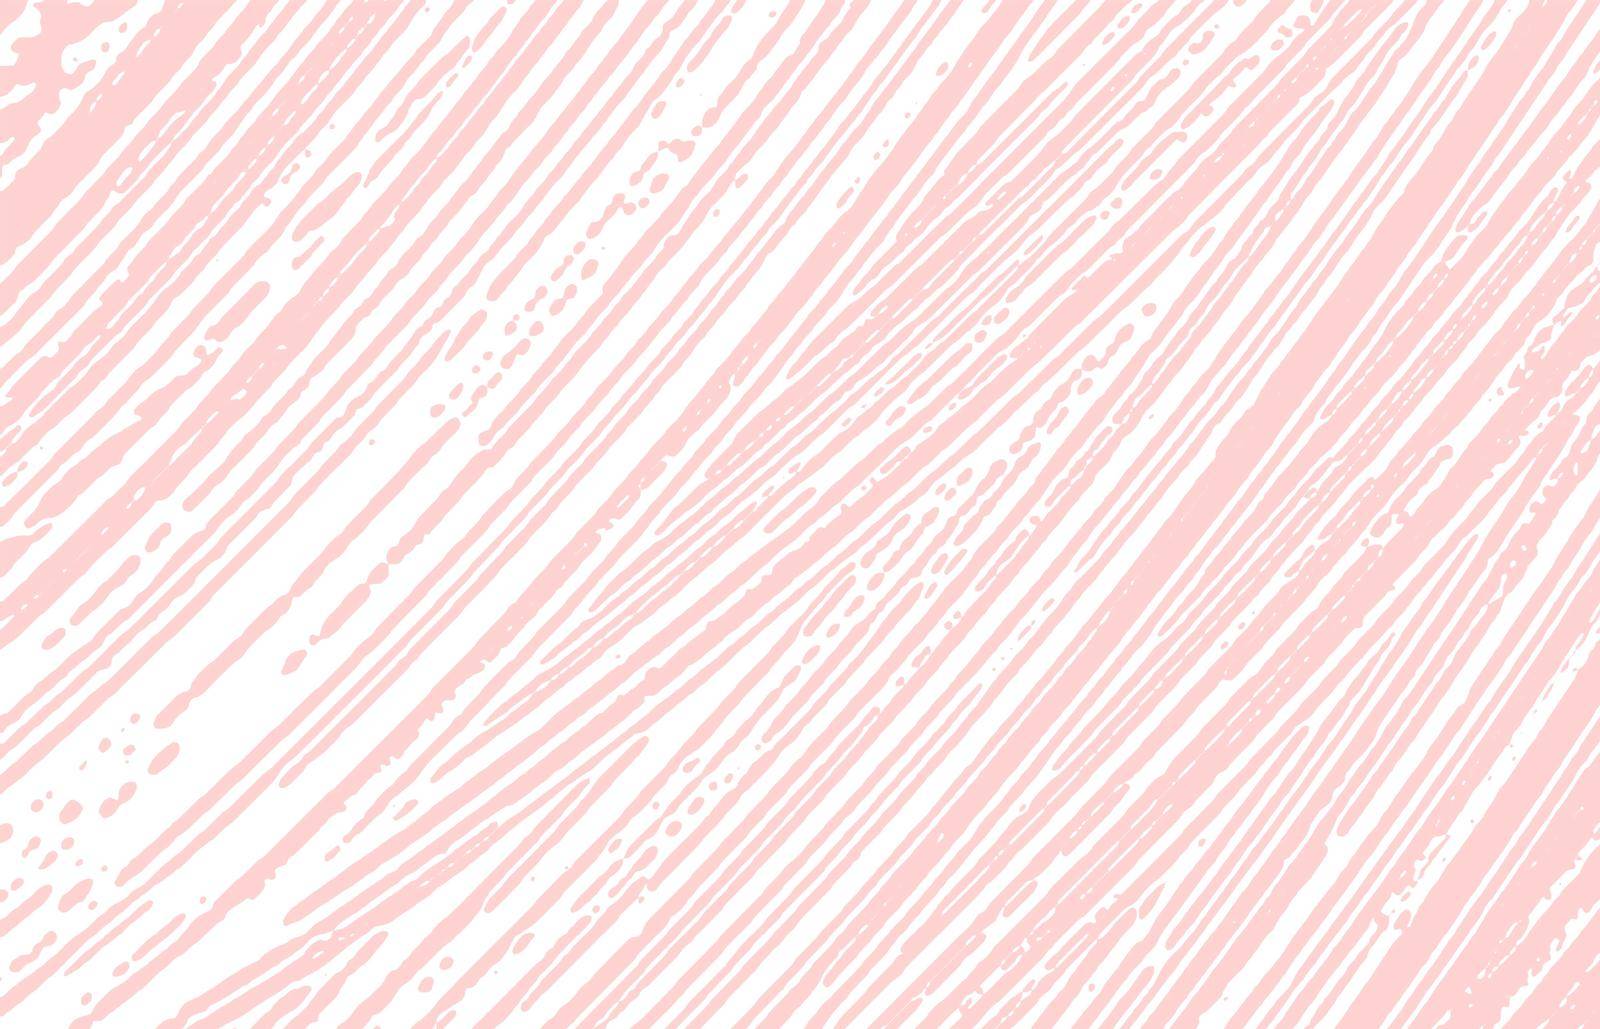 Grunge texture. Distress pink rough trace. Glamorous background. Noise dirty grunge texture. Fetching artistic surface. Vector illustration.